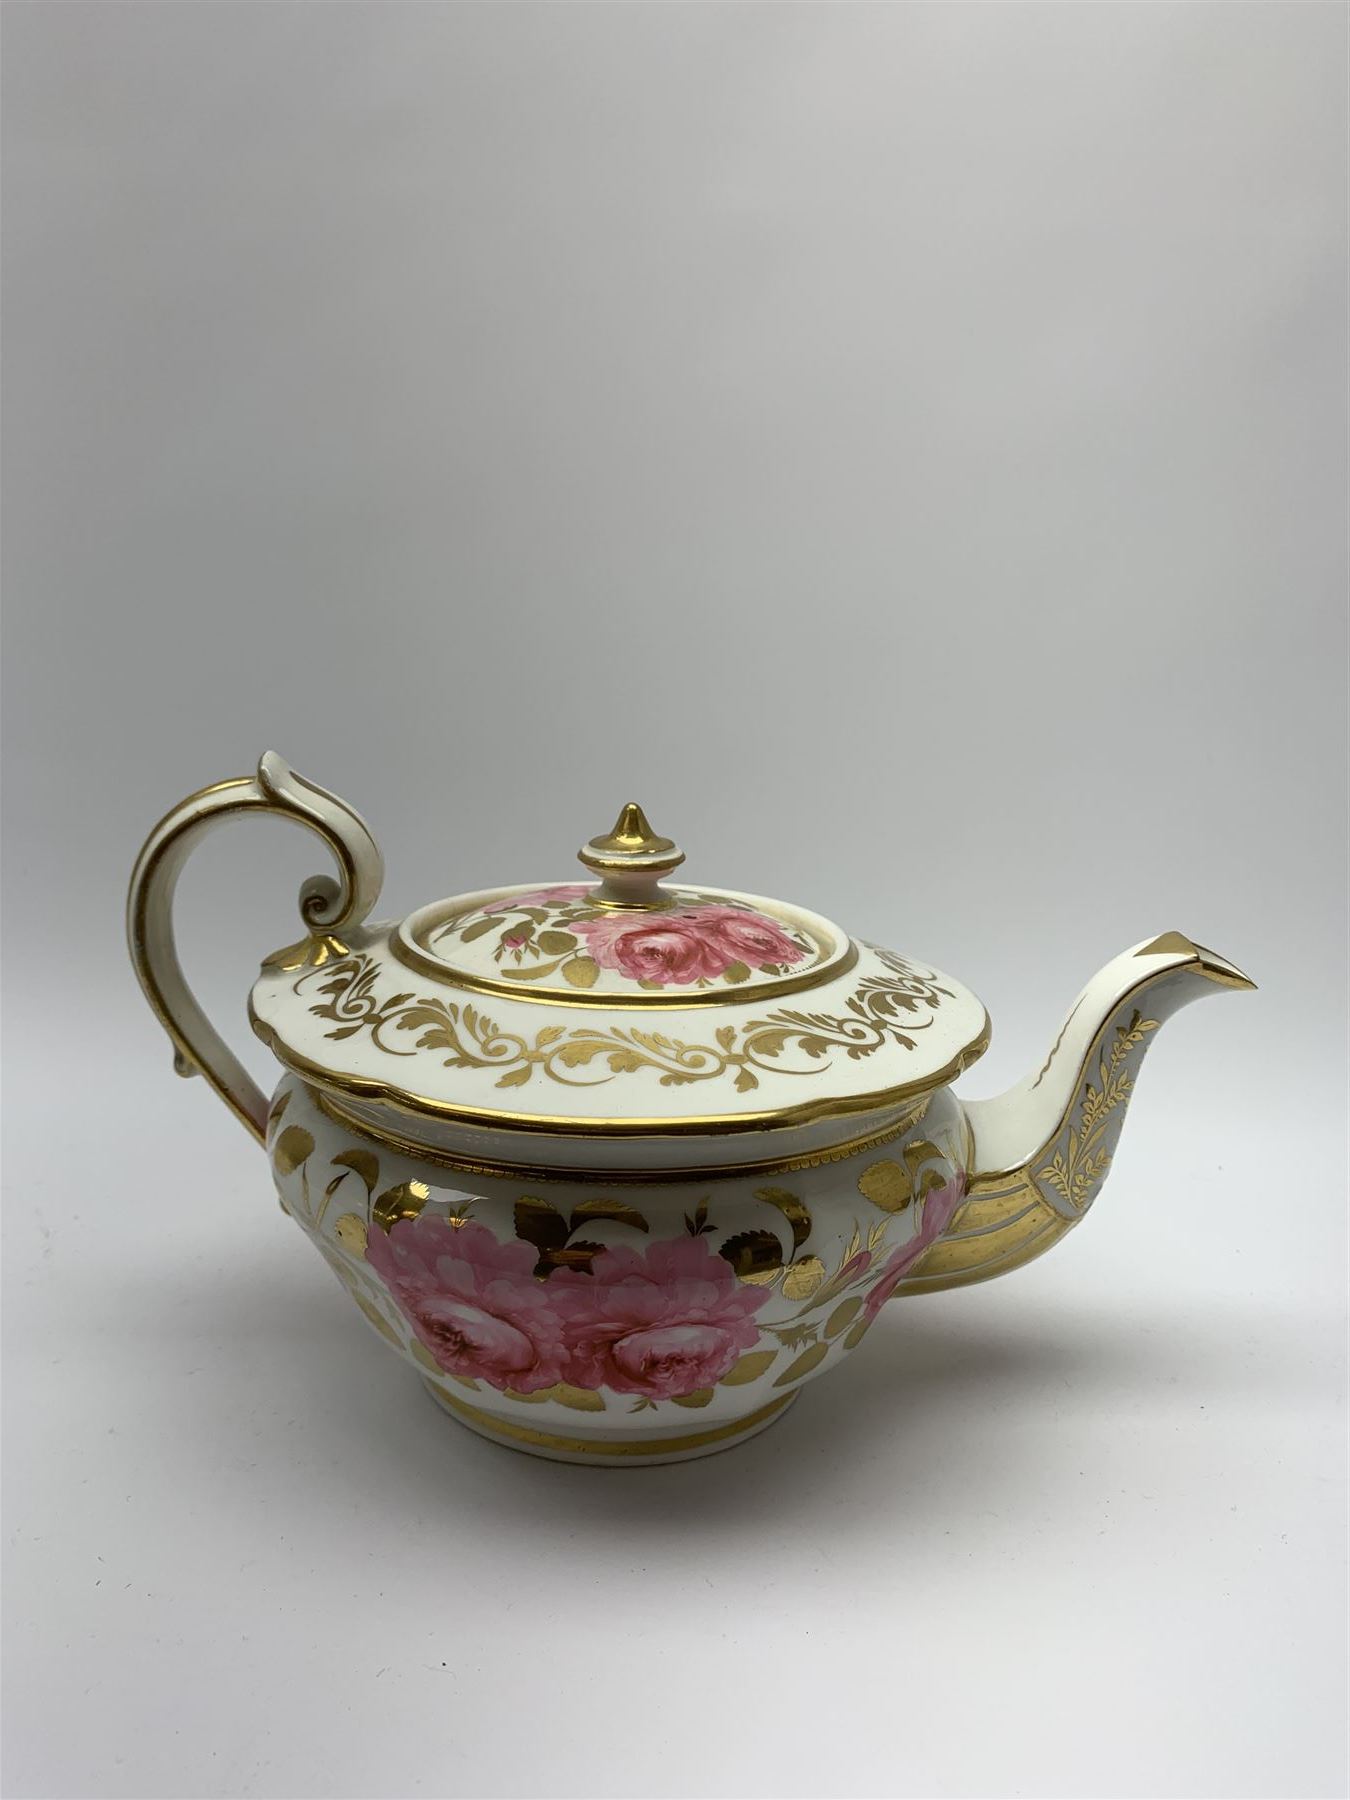 Early 19th century Daniel tea set for one - Image 7 of 9